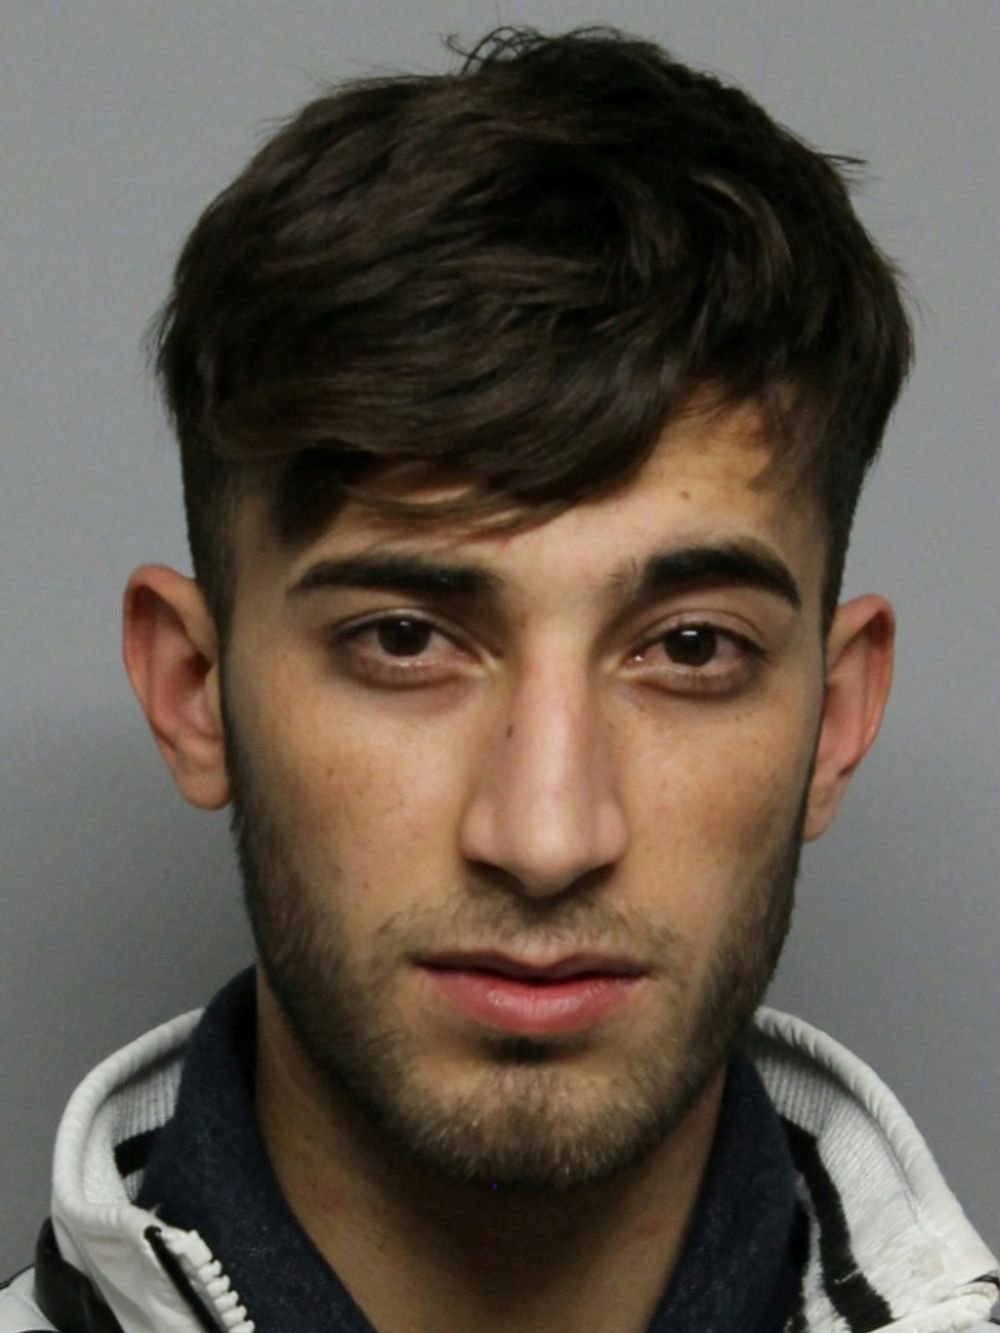 Police handout picture released June 7, 2018, of Iraqi asylum seeker Ali Bashar, suspected of the rape and murder of a teenage girl